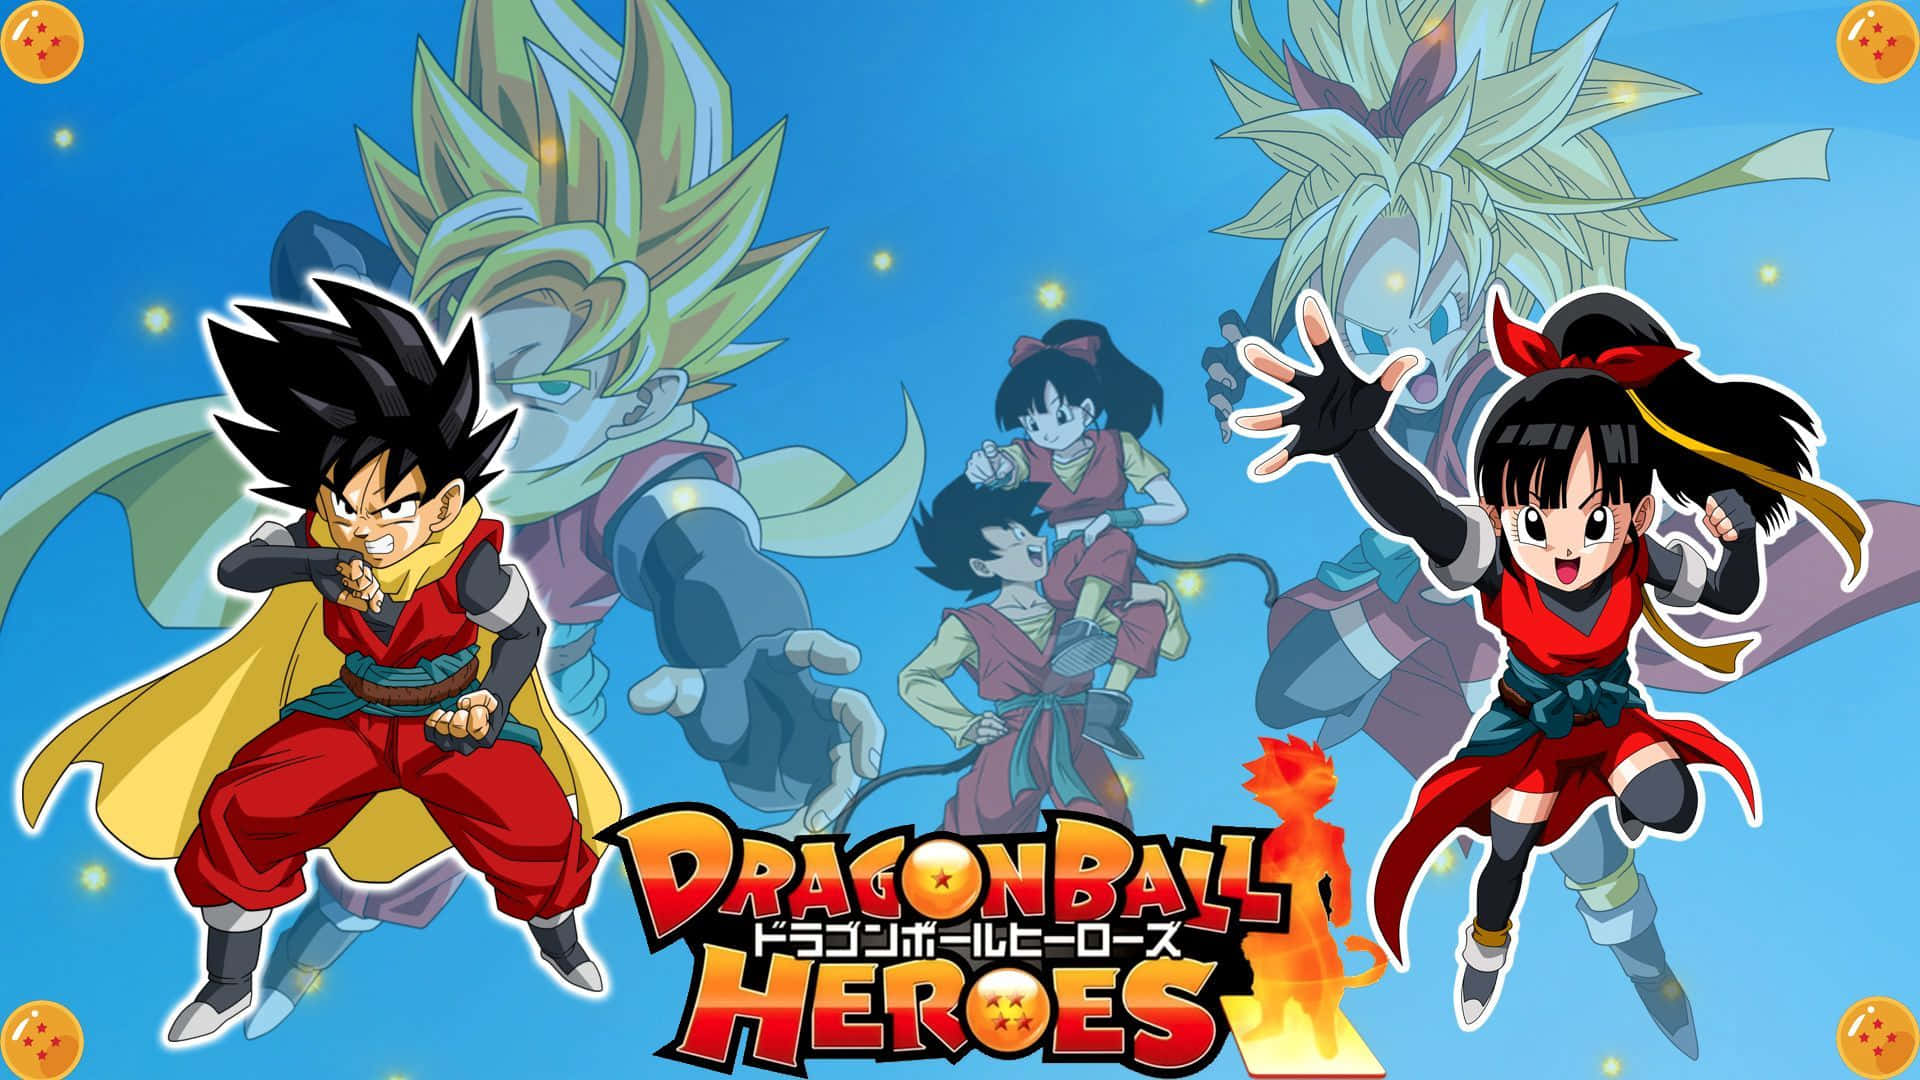 Enter a thrilling digital world with Dragon Ball Heroes Wallpaper